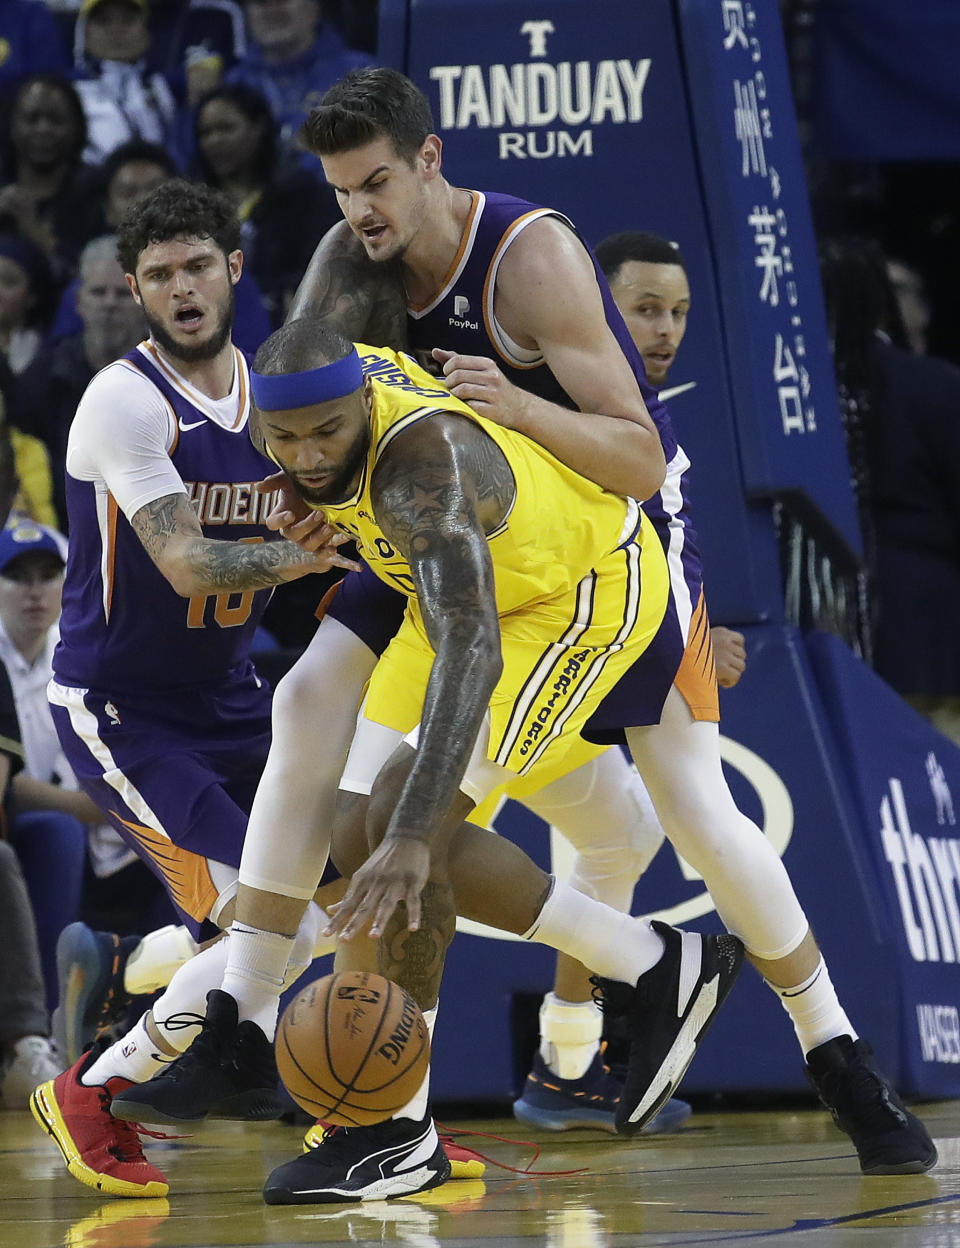 Golden State Warriors center DeMarcus Cousins, center, reaches for the ball in front of Phoenix Suns guard Tyler Johnson, left, and forward Dragan Bender during the first half of an NBA basketball game in Oakland, Calif., Sunday, March 10, 2019. (AP Photo/Jeff Chiu)